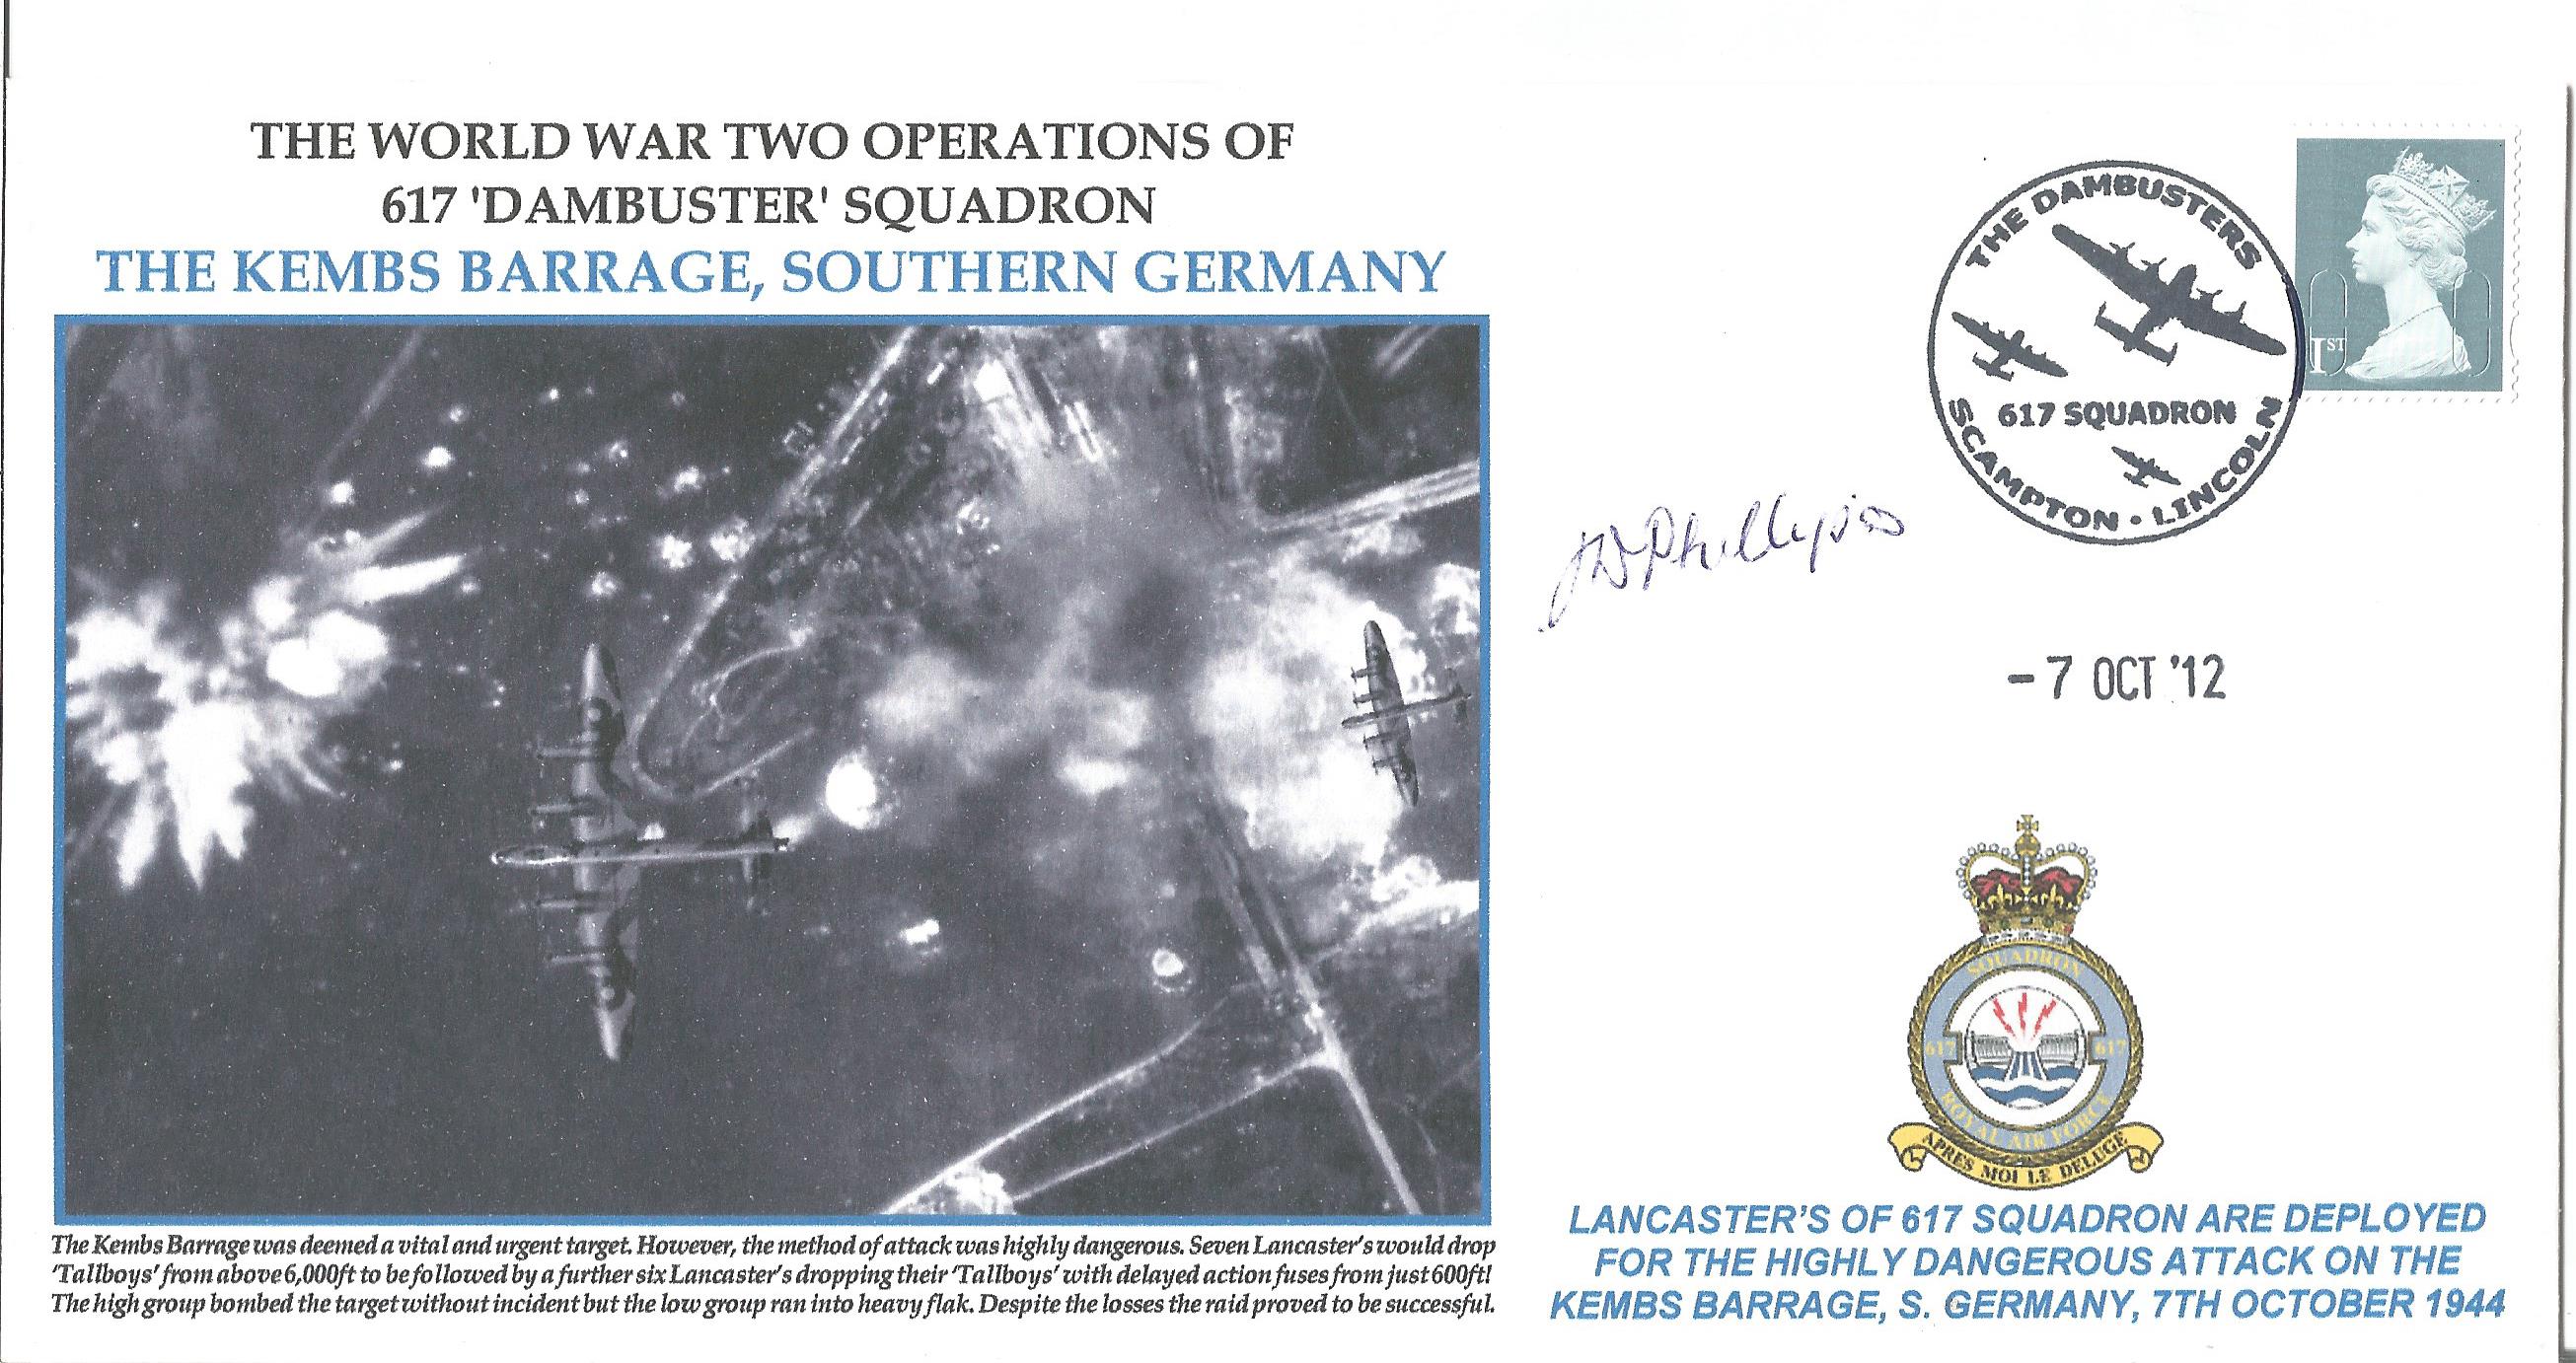 W Off. John Des Phillips Flt. Eng. 617 Sqn. signed Series cover for the World War Two Operations